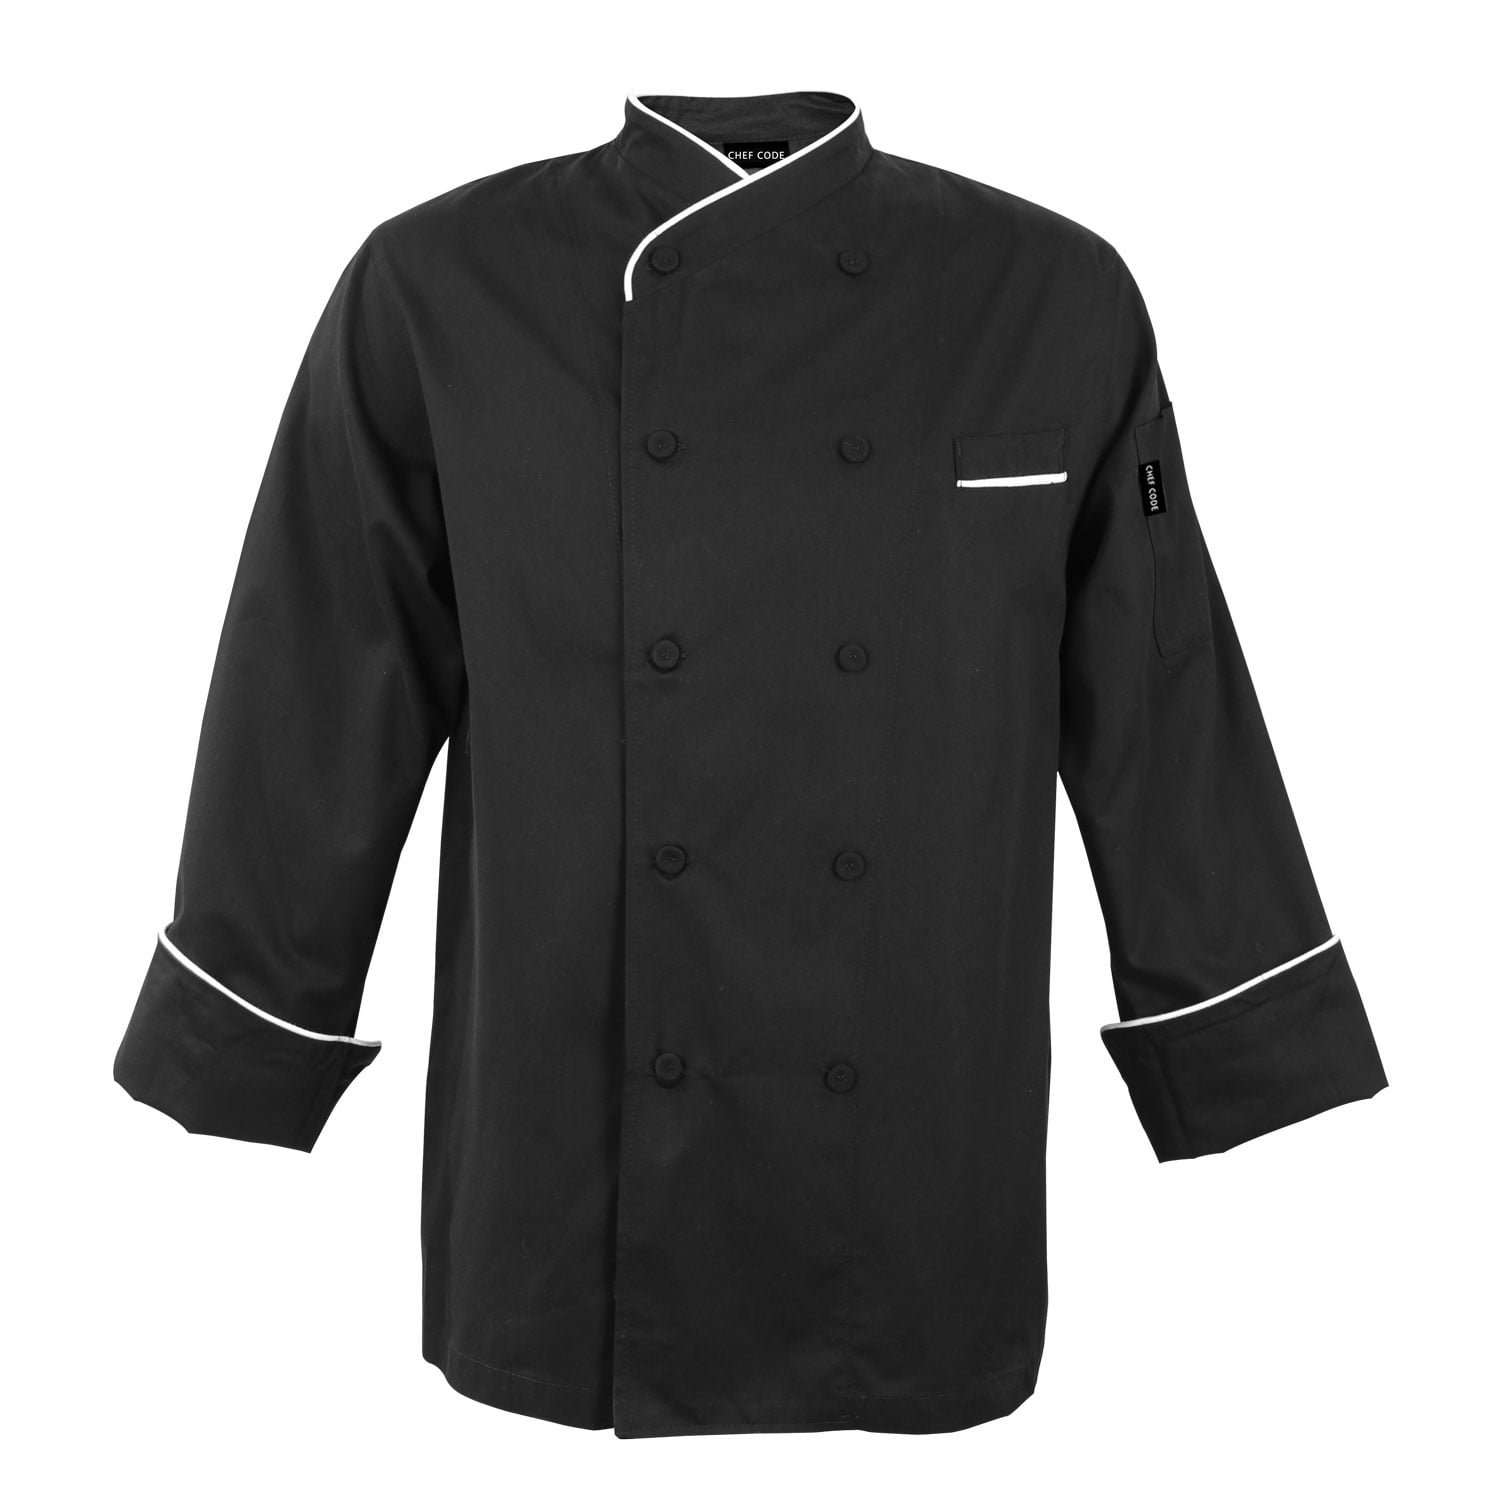 Chef Code Lorenzo Executive Chef Coat with Cloth Covered Buttons CC101 